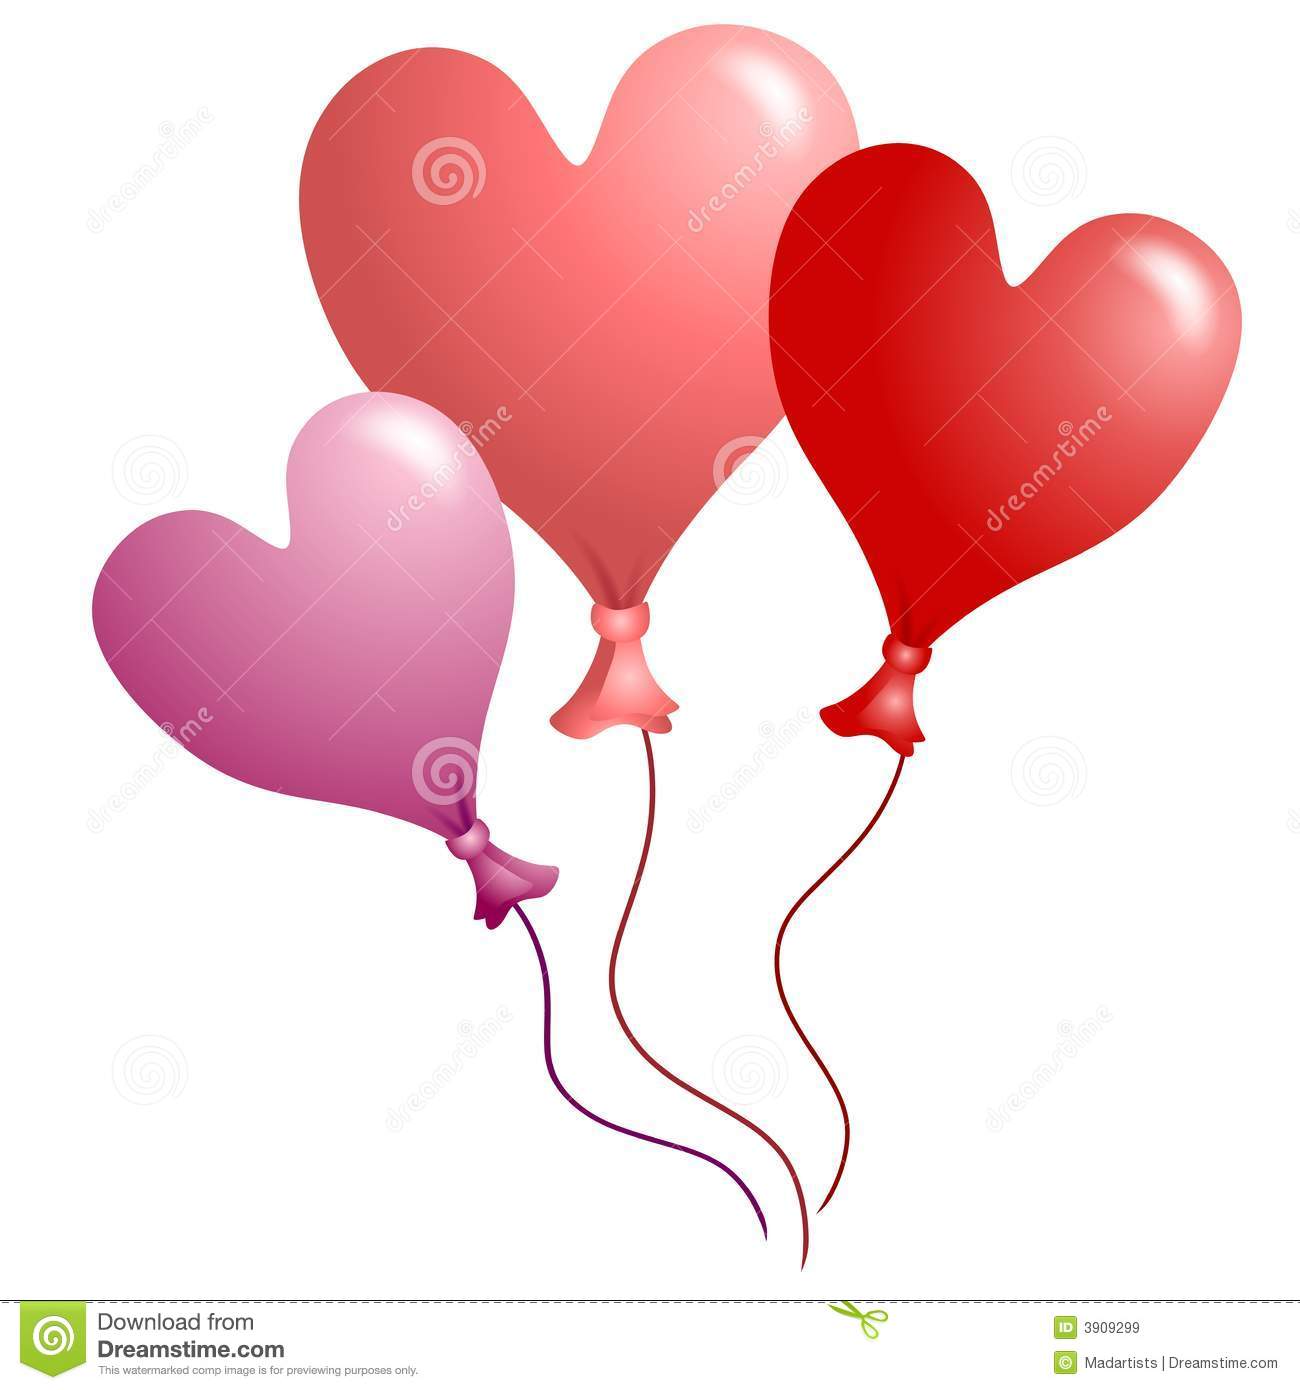 Featuring 3 Heart Shaped Valentine S Day Balloons Isolated On White